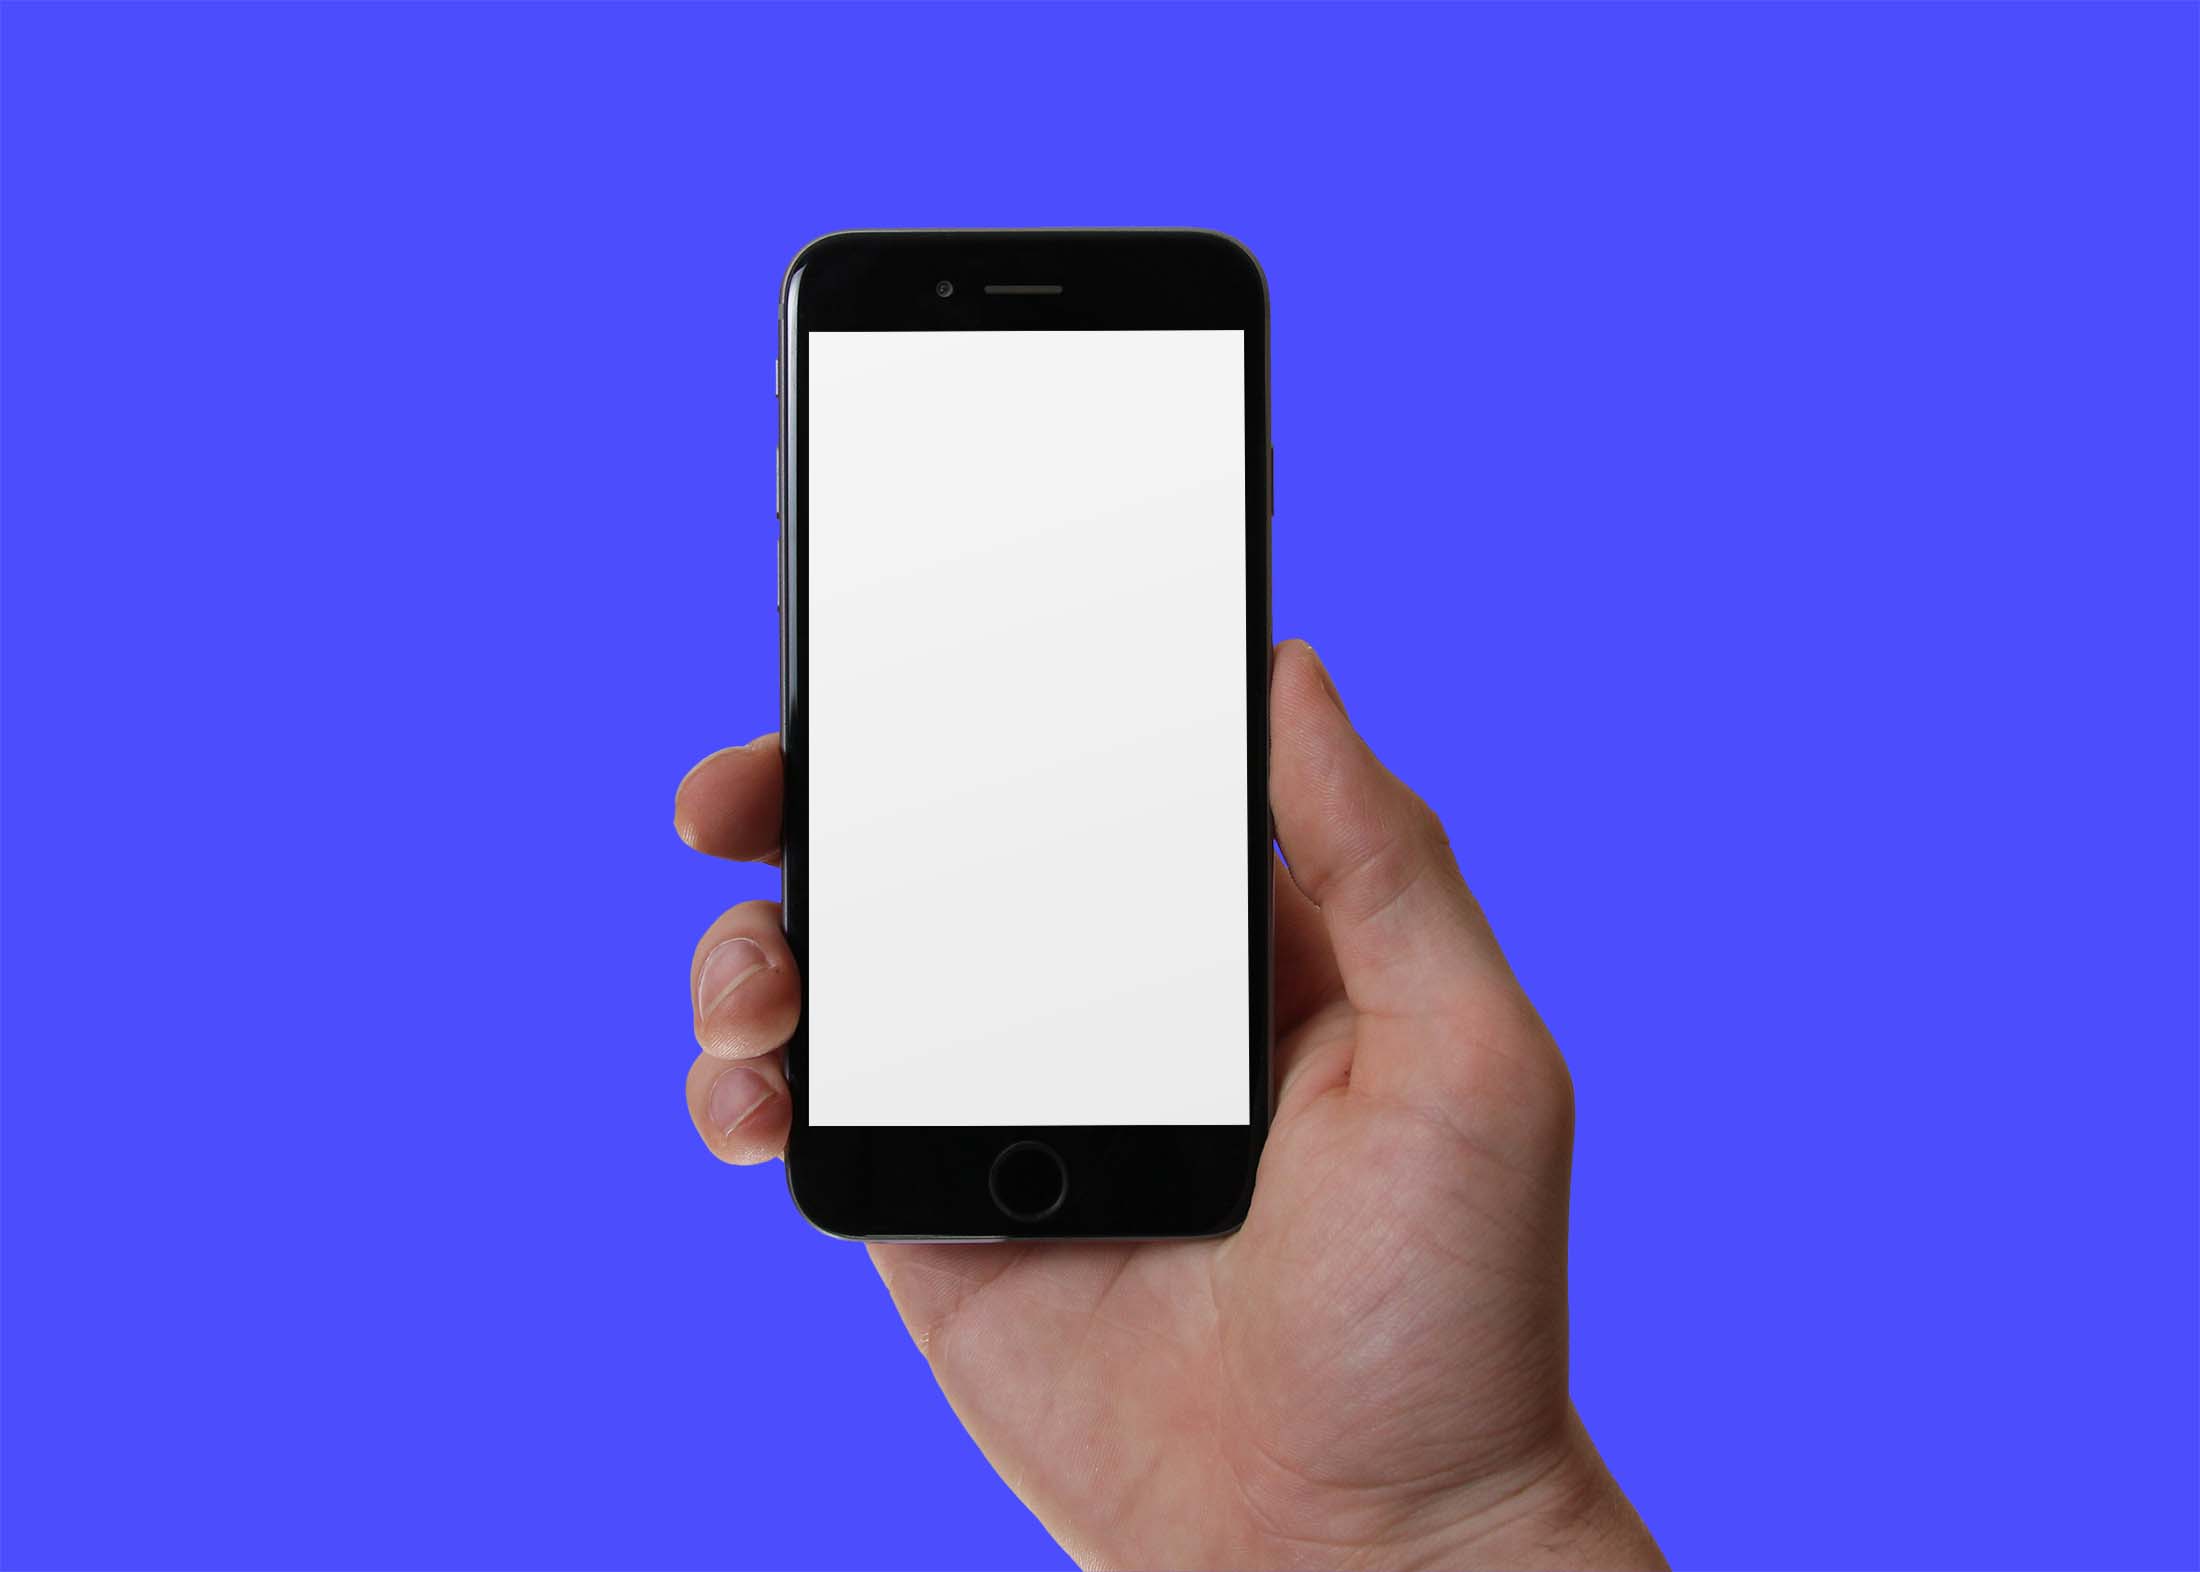 Free iPhone in Hand Mockup Free iPhone in Hand Mockup